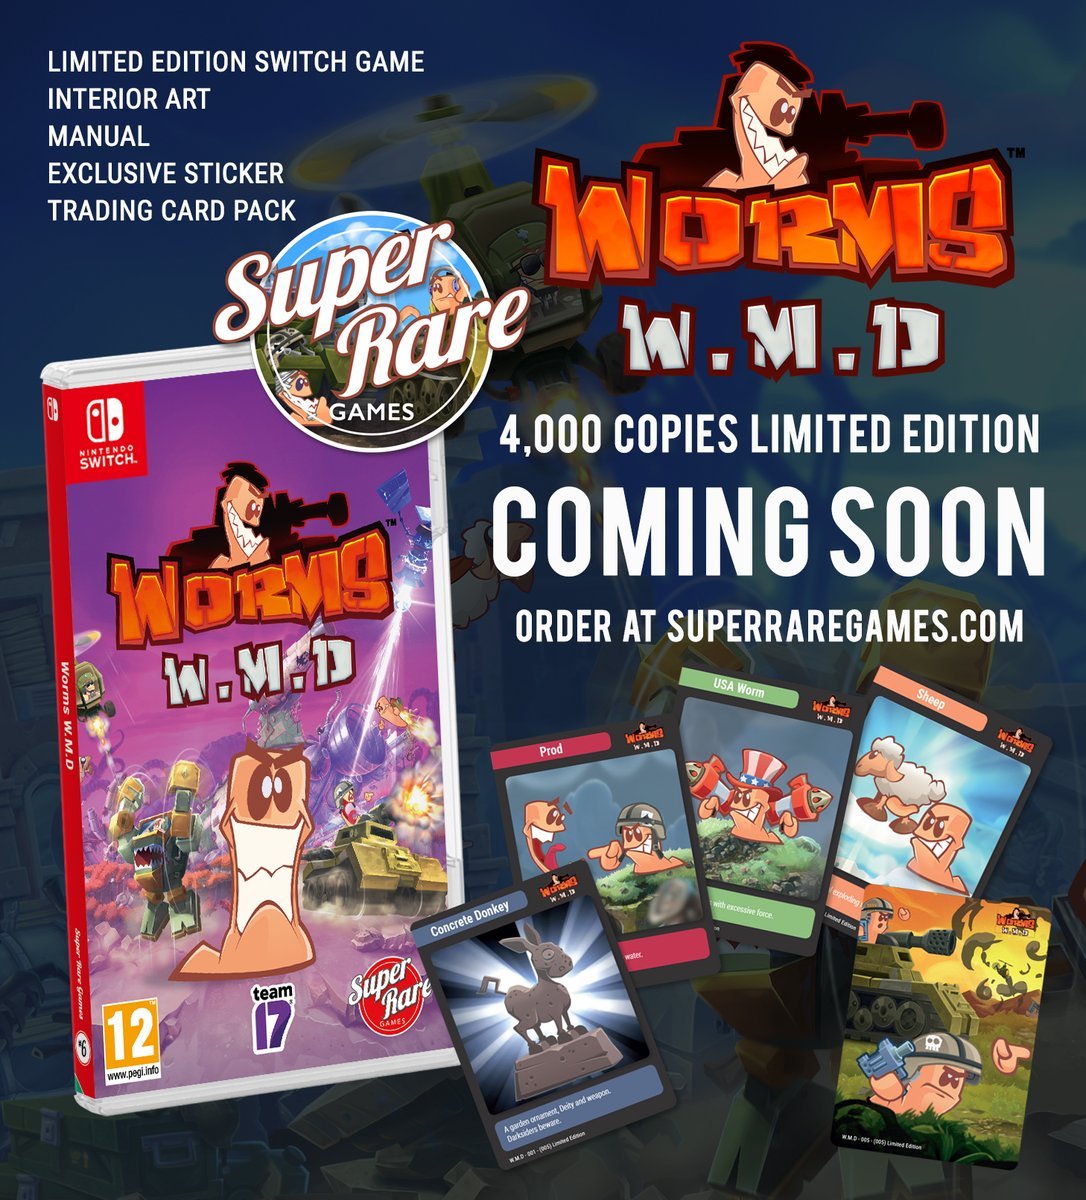 Limited Game News Today Wormswmd By Superraregames Team17ltd For Nintendoswitch Pre Order Starts Today Sep 13th At 10am Pdt 1pm Edt 6pm Bst 7pm Cest Check Here